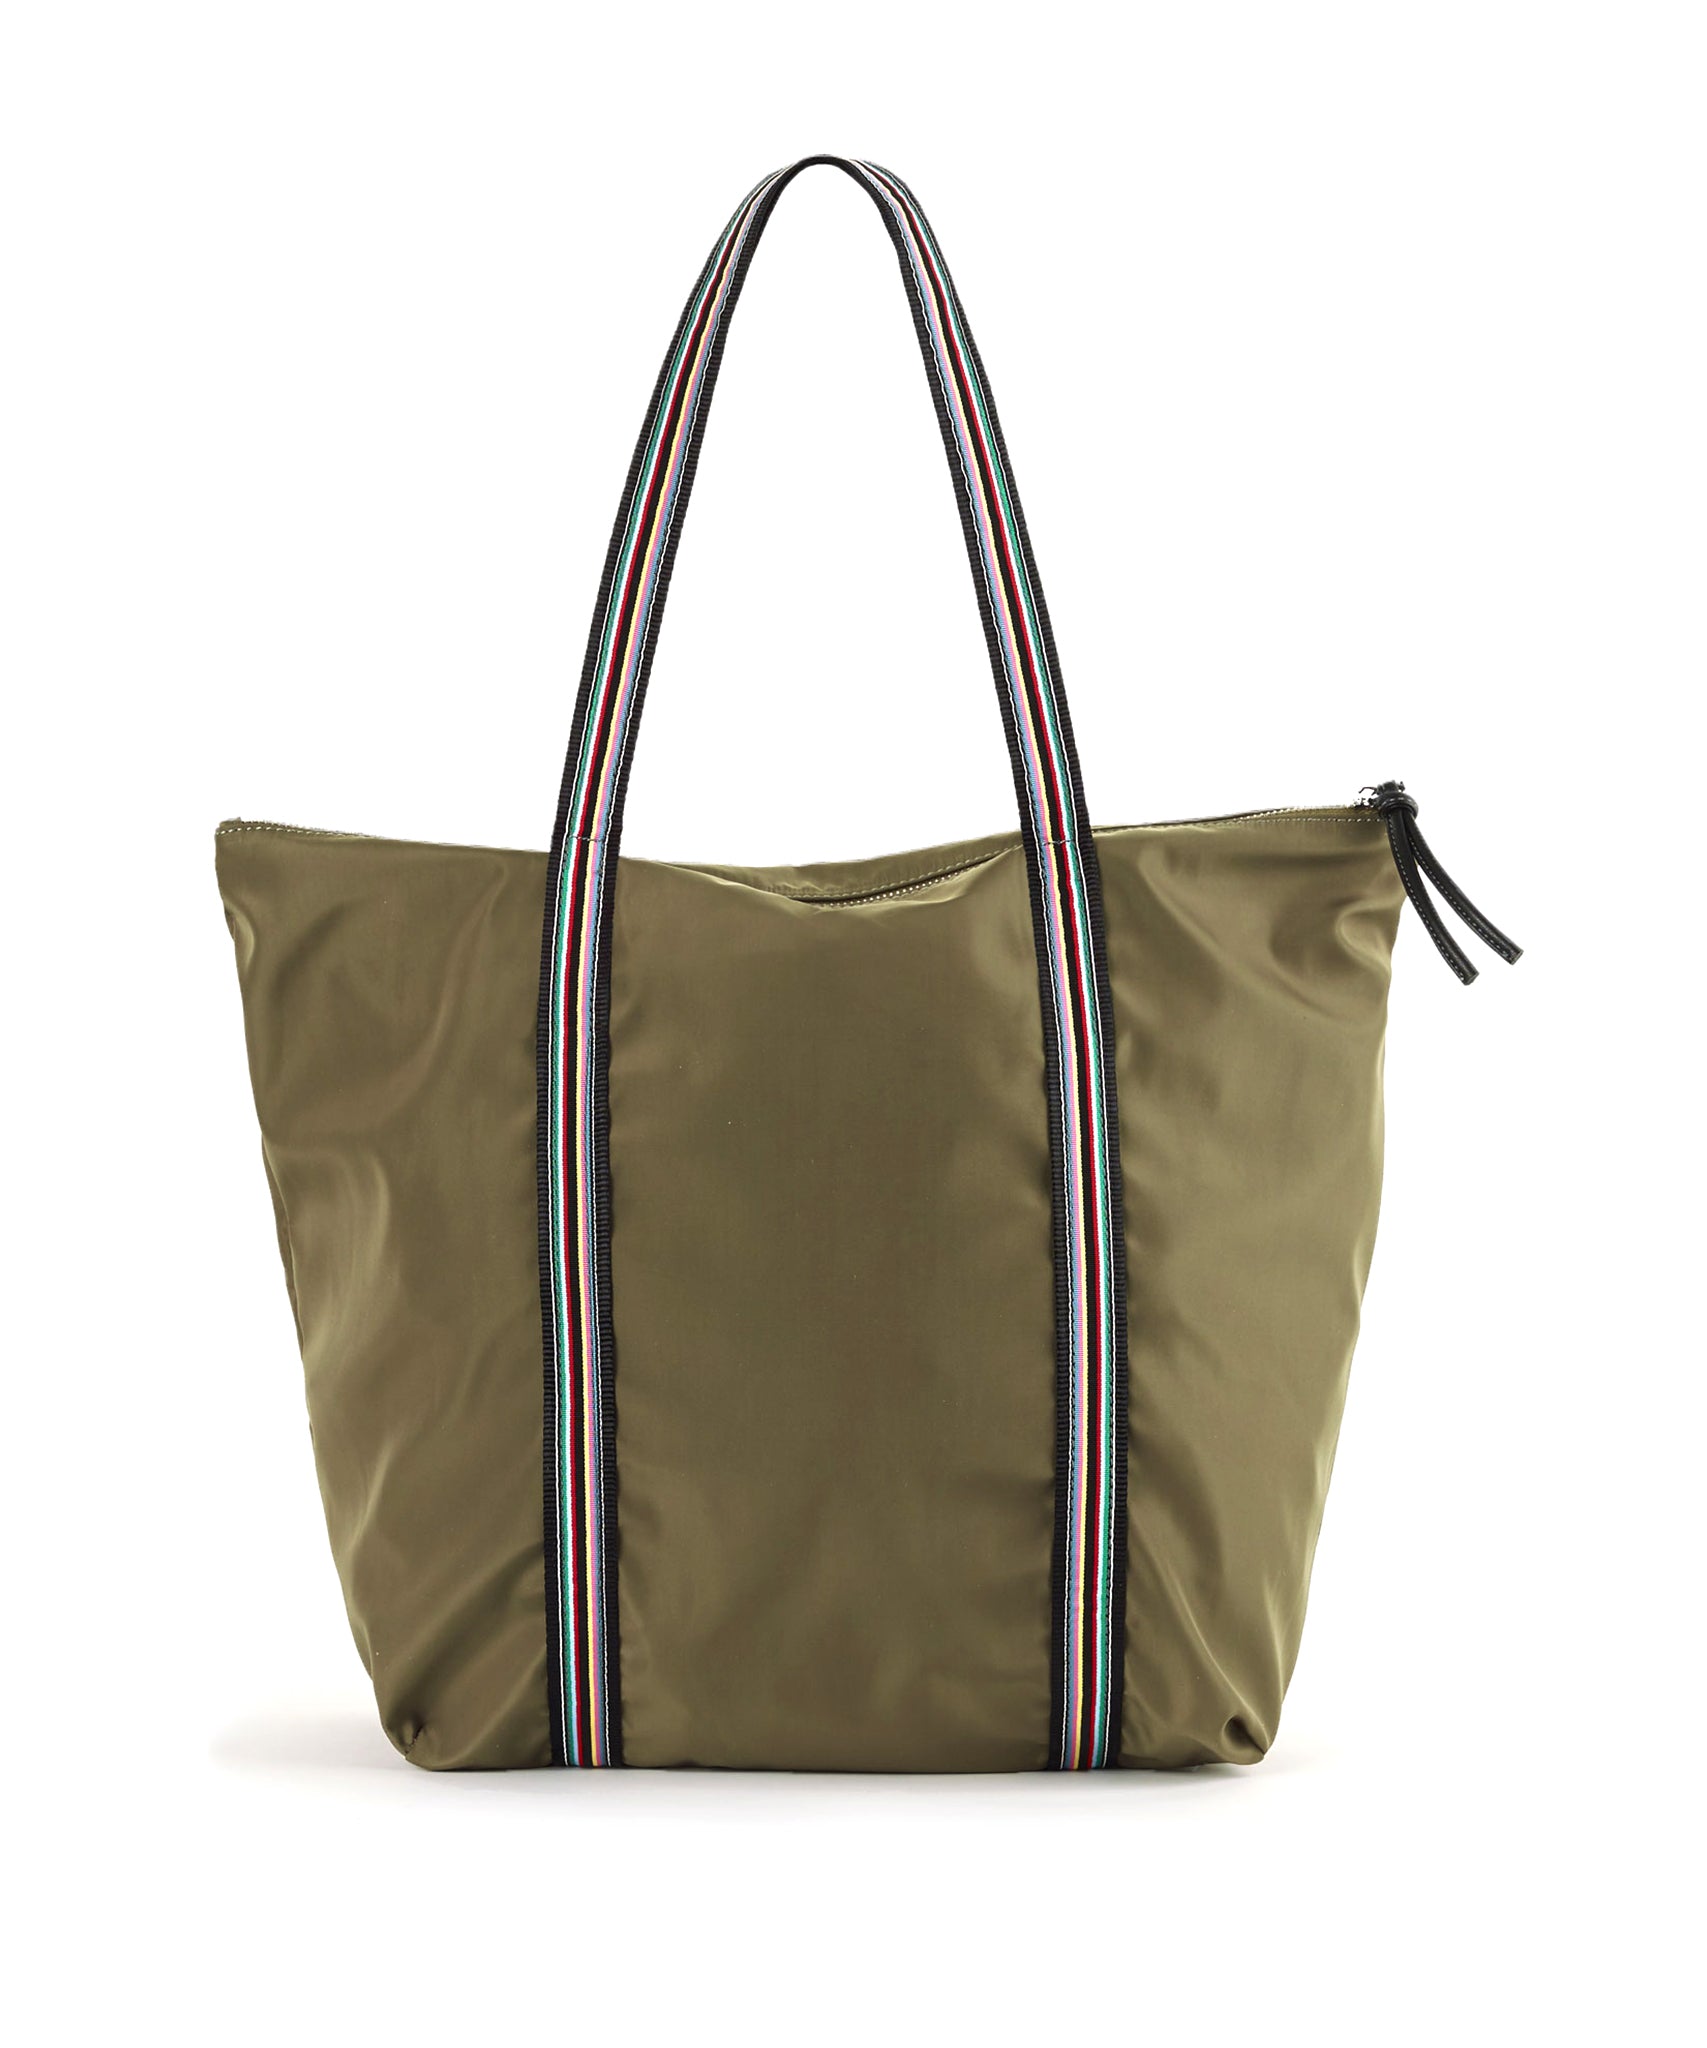 London Tote in color Evergreen